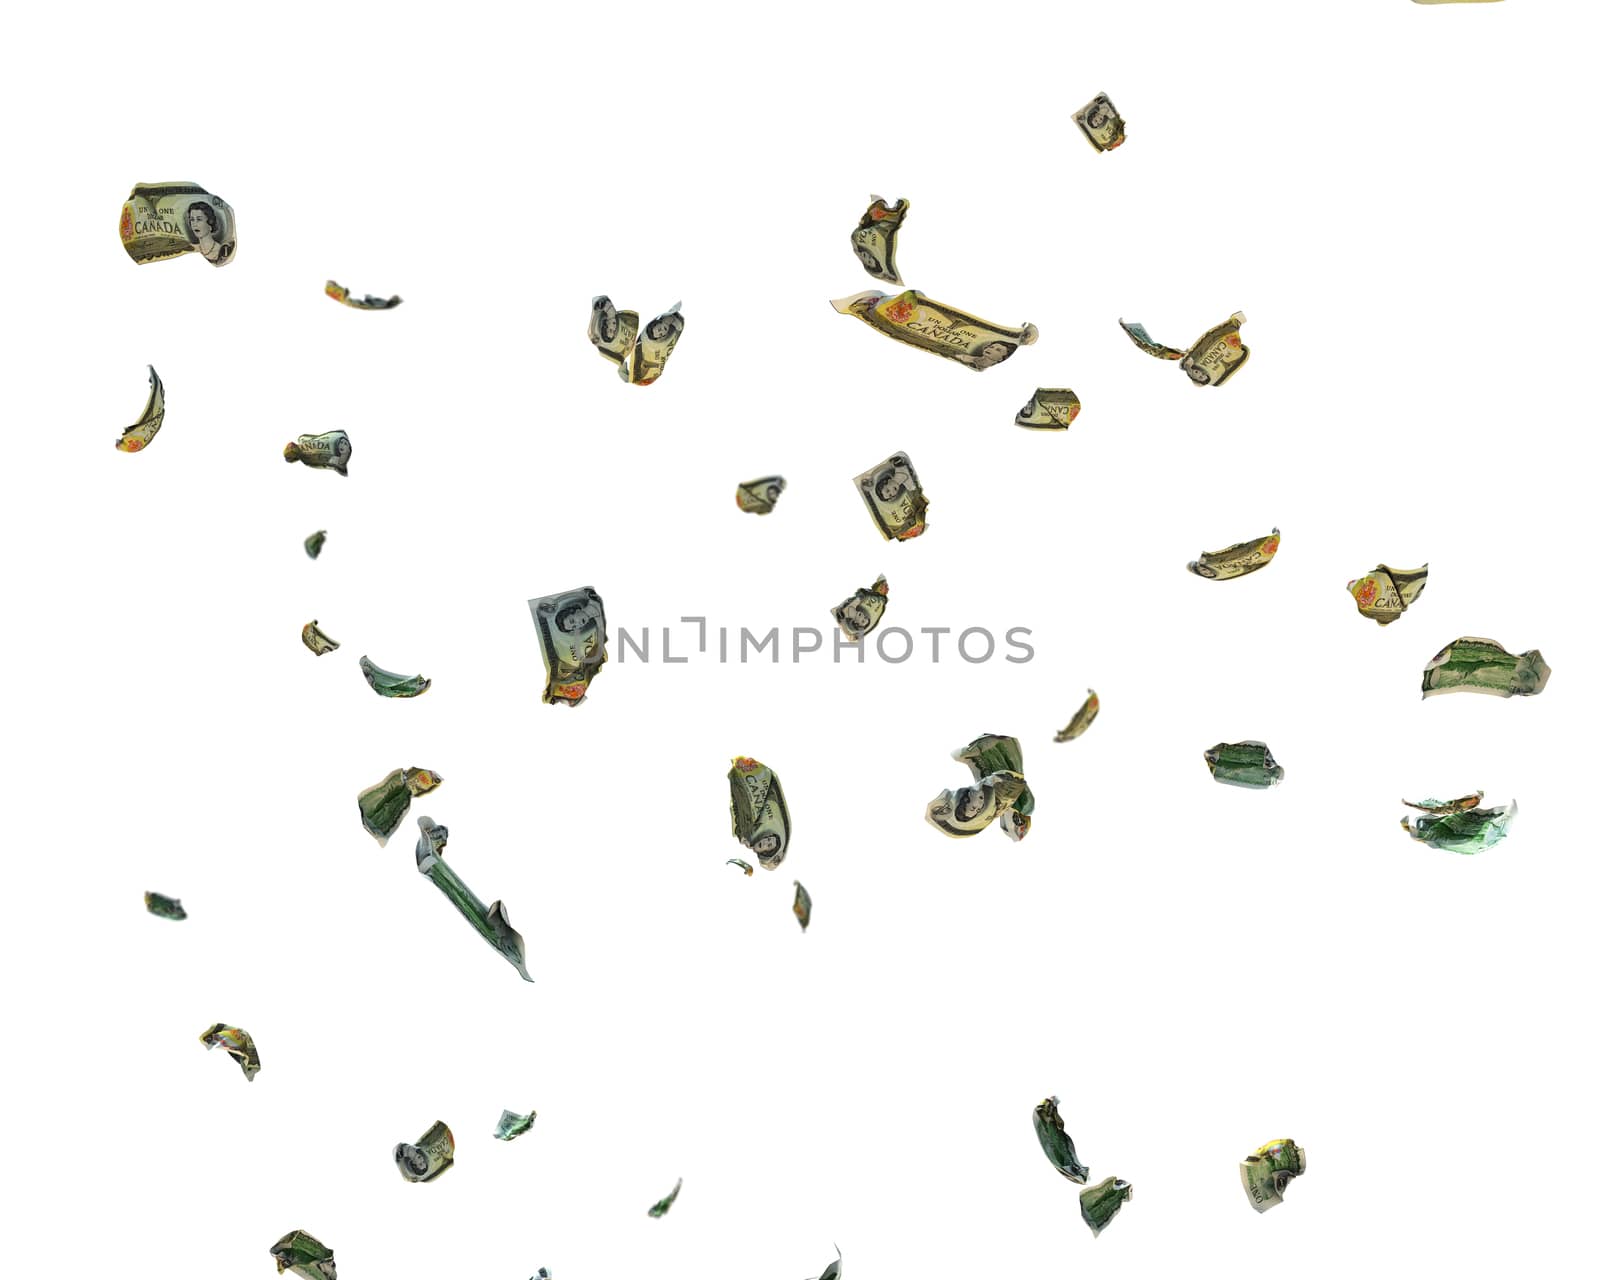 1 Canadian Dollar Currency Crumpled Banknotes flying, against white, clipping path included